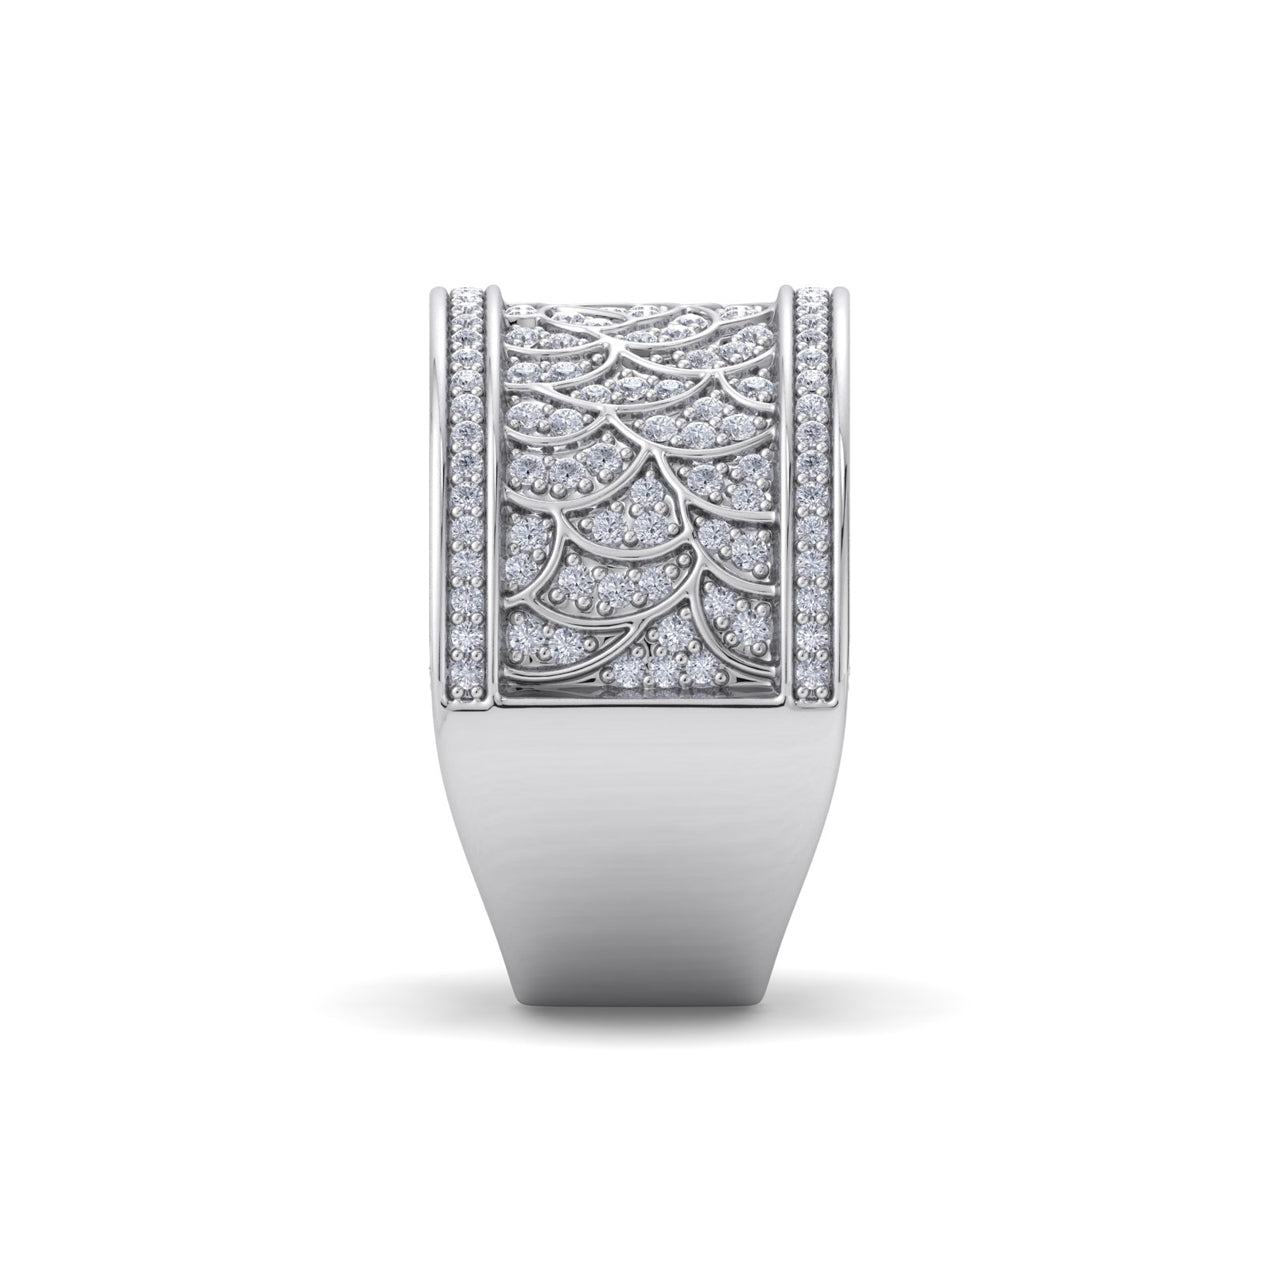 Wide ring in white gold with white diamonds of 0.82 ct in weight